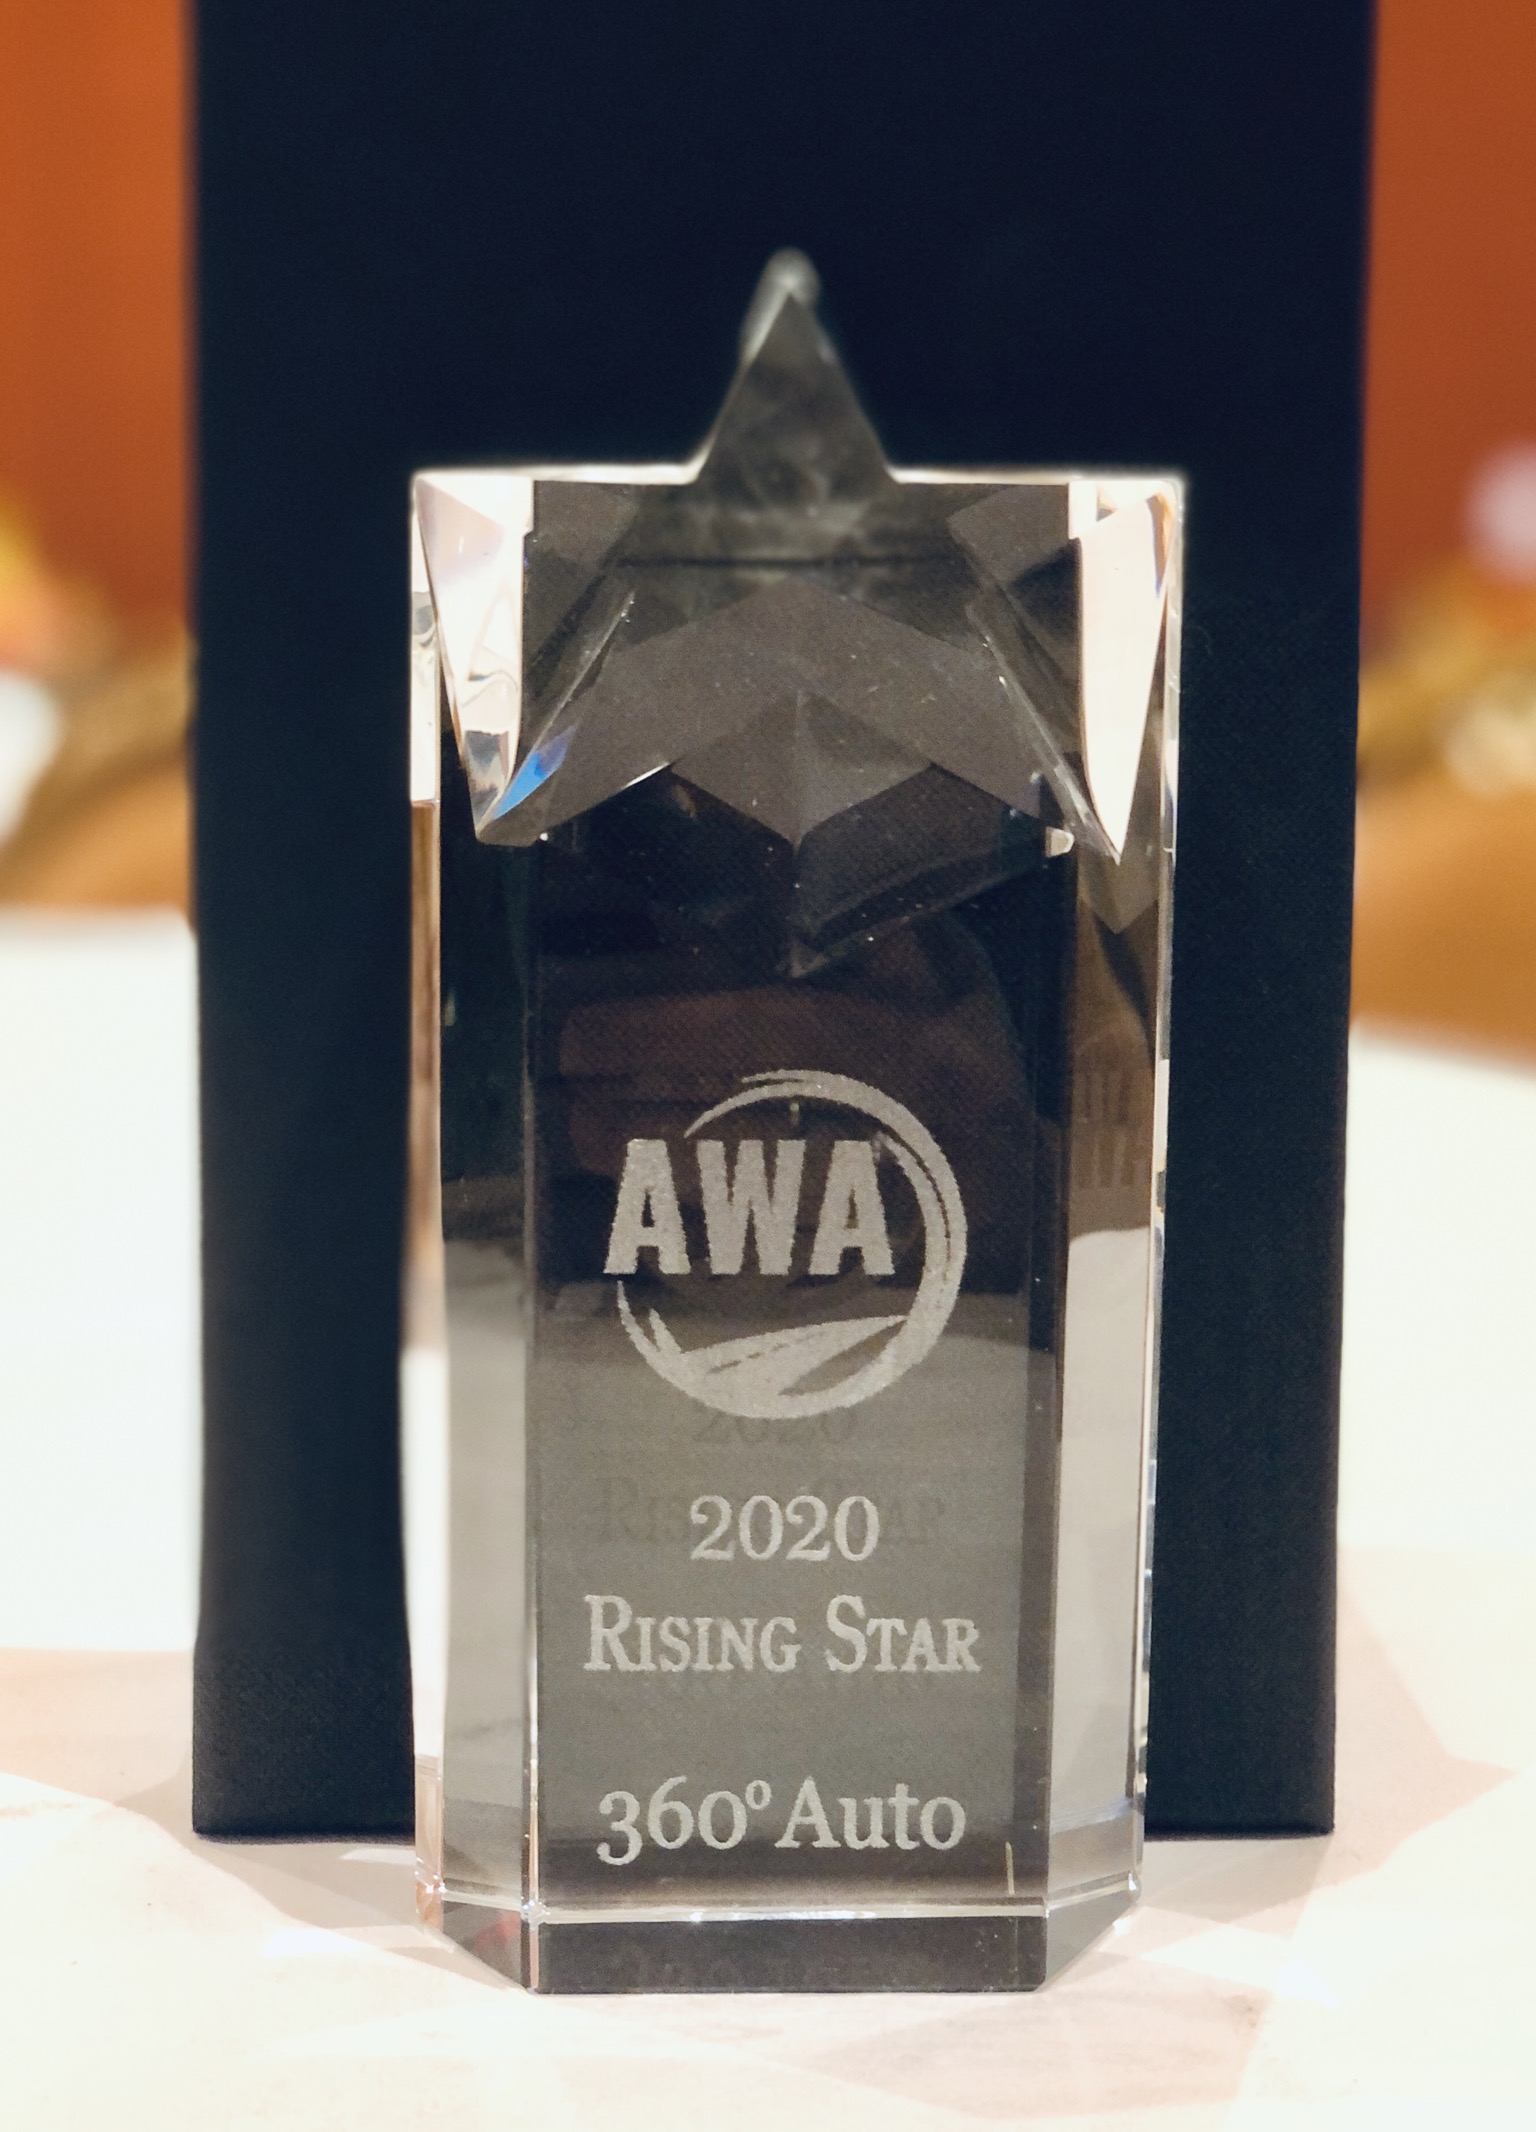 360 AUTO wins AWA Rising Star award for its new 360CXM™ technology at the 2020 NADA Expo in Las Vegas, Nevada